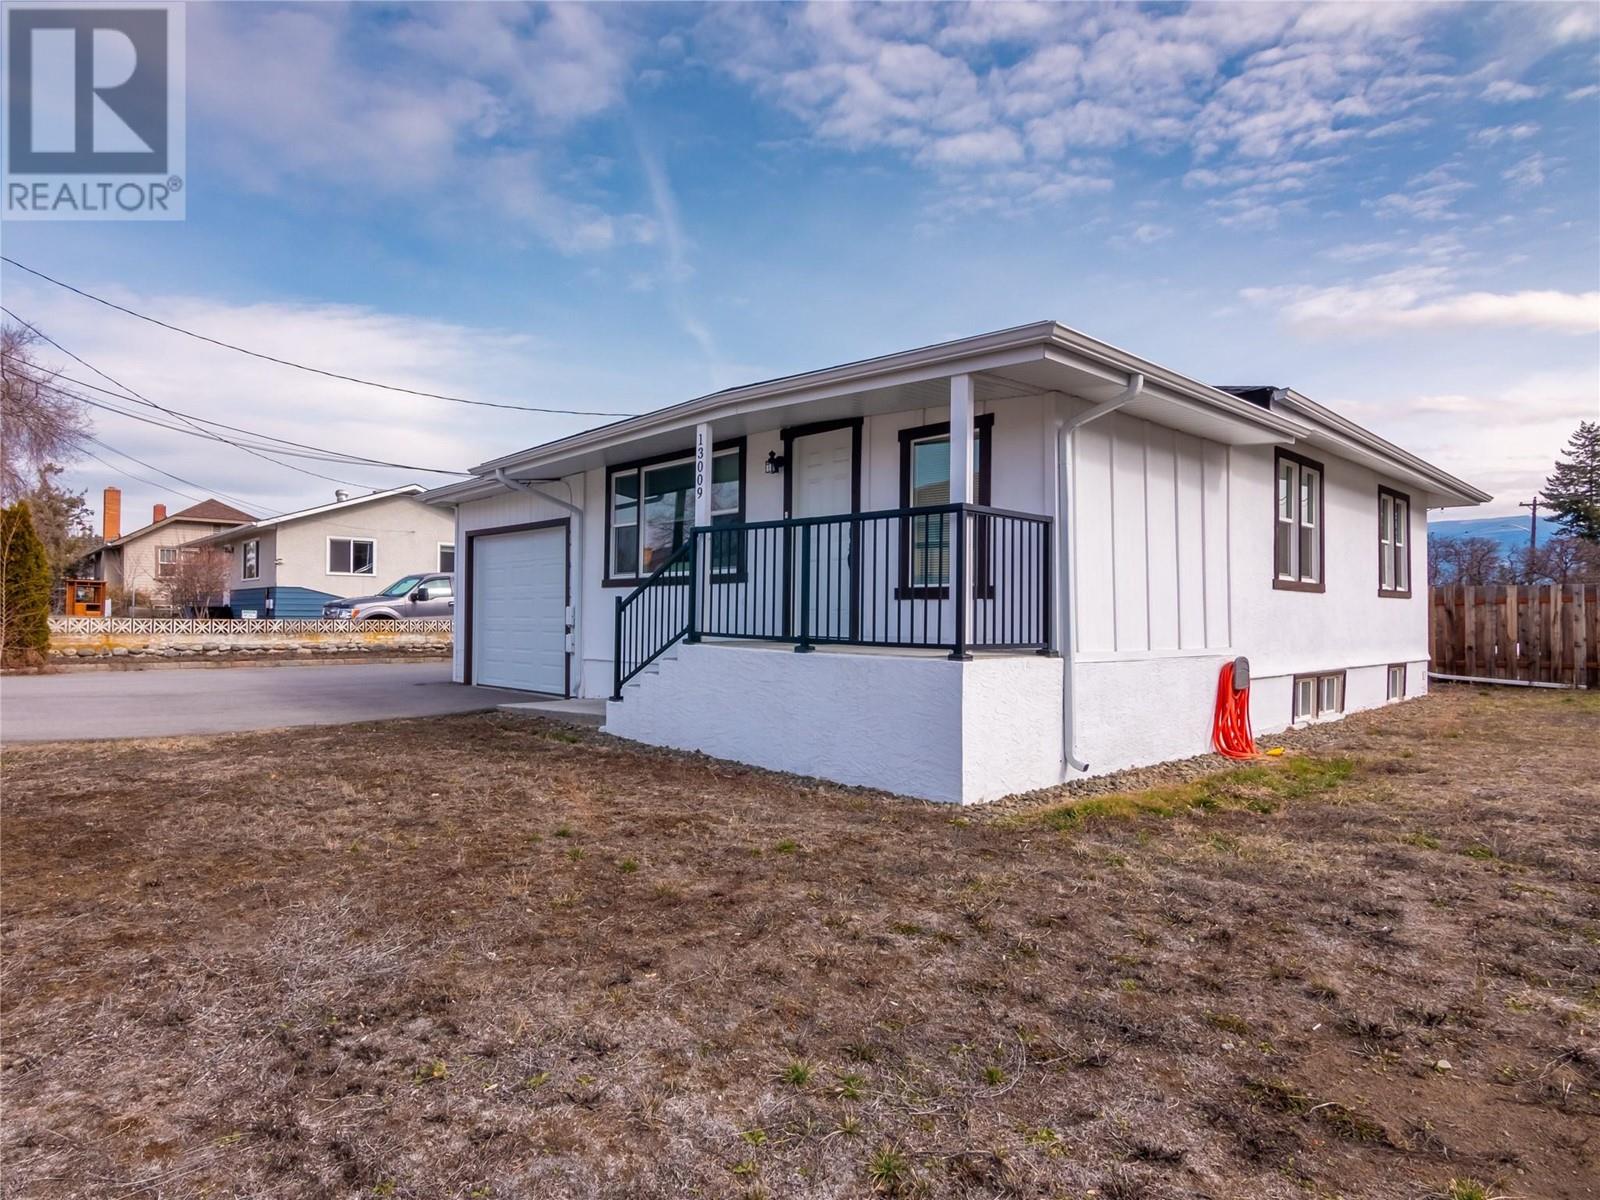  13009 Armstrong Avenue, Summerland